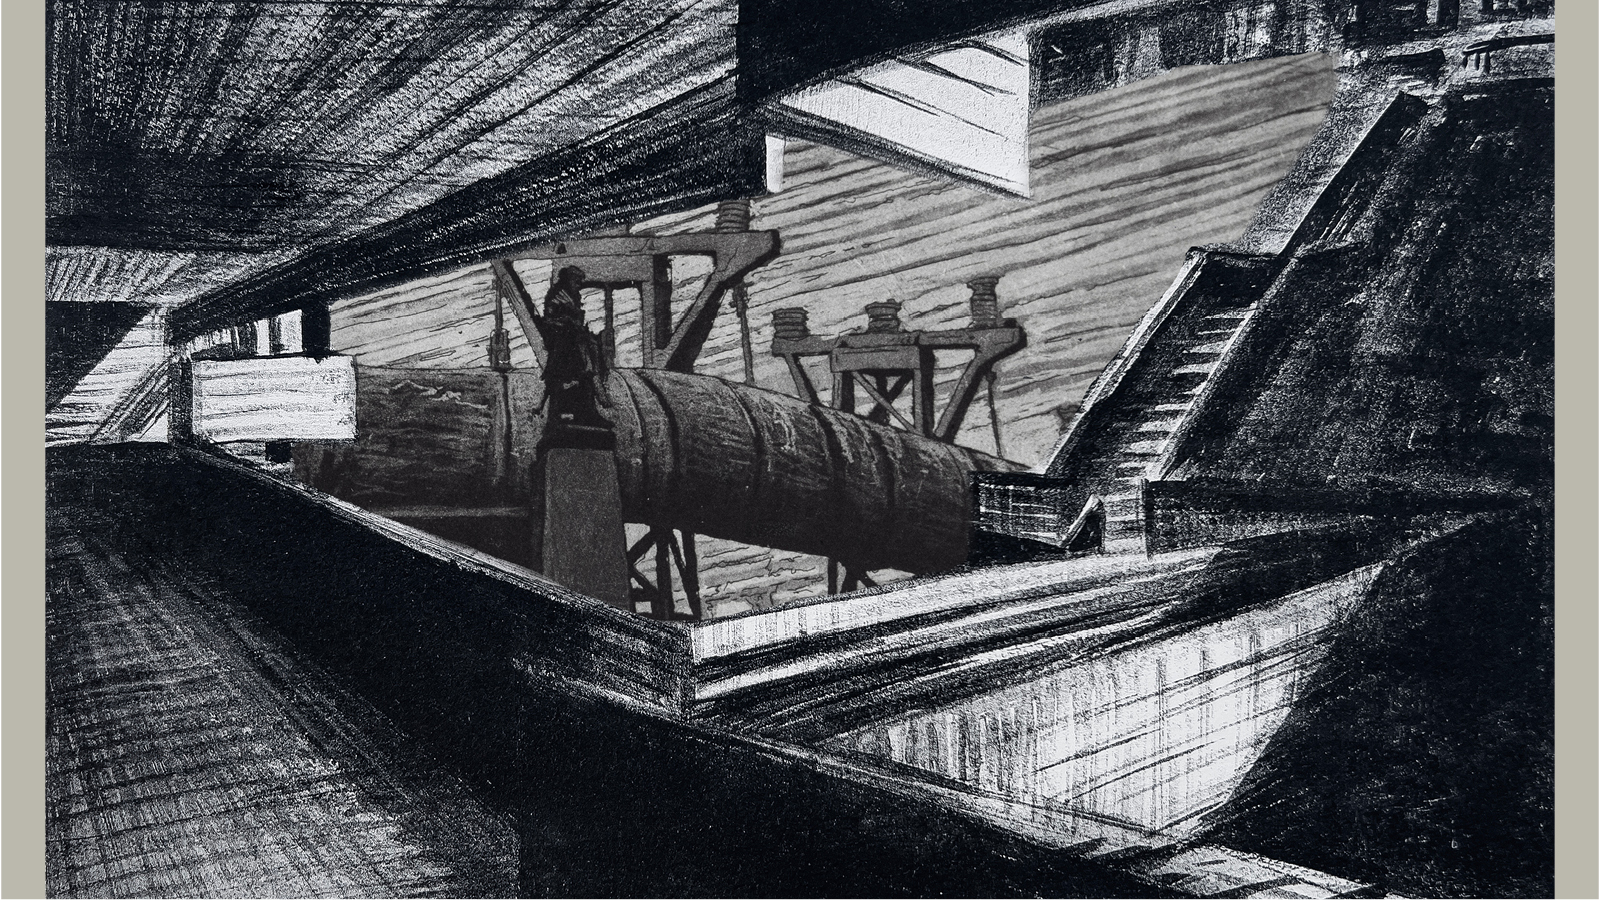 The viewer is situated within a heavy, dark interior with a low roof. A low wall separates the walkway the viewer is on from an open expanse beyond, where a large pipeline structure crosses the space. A statue of a man with a large, ankle length coat stands on an obelisk in front of the pipe, and a staircase leads upwards off to the right past the open space.